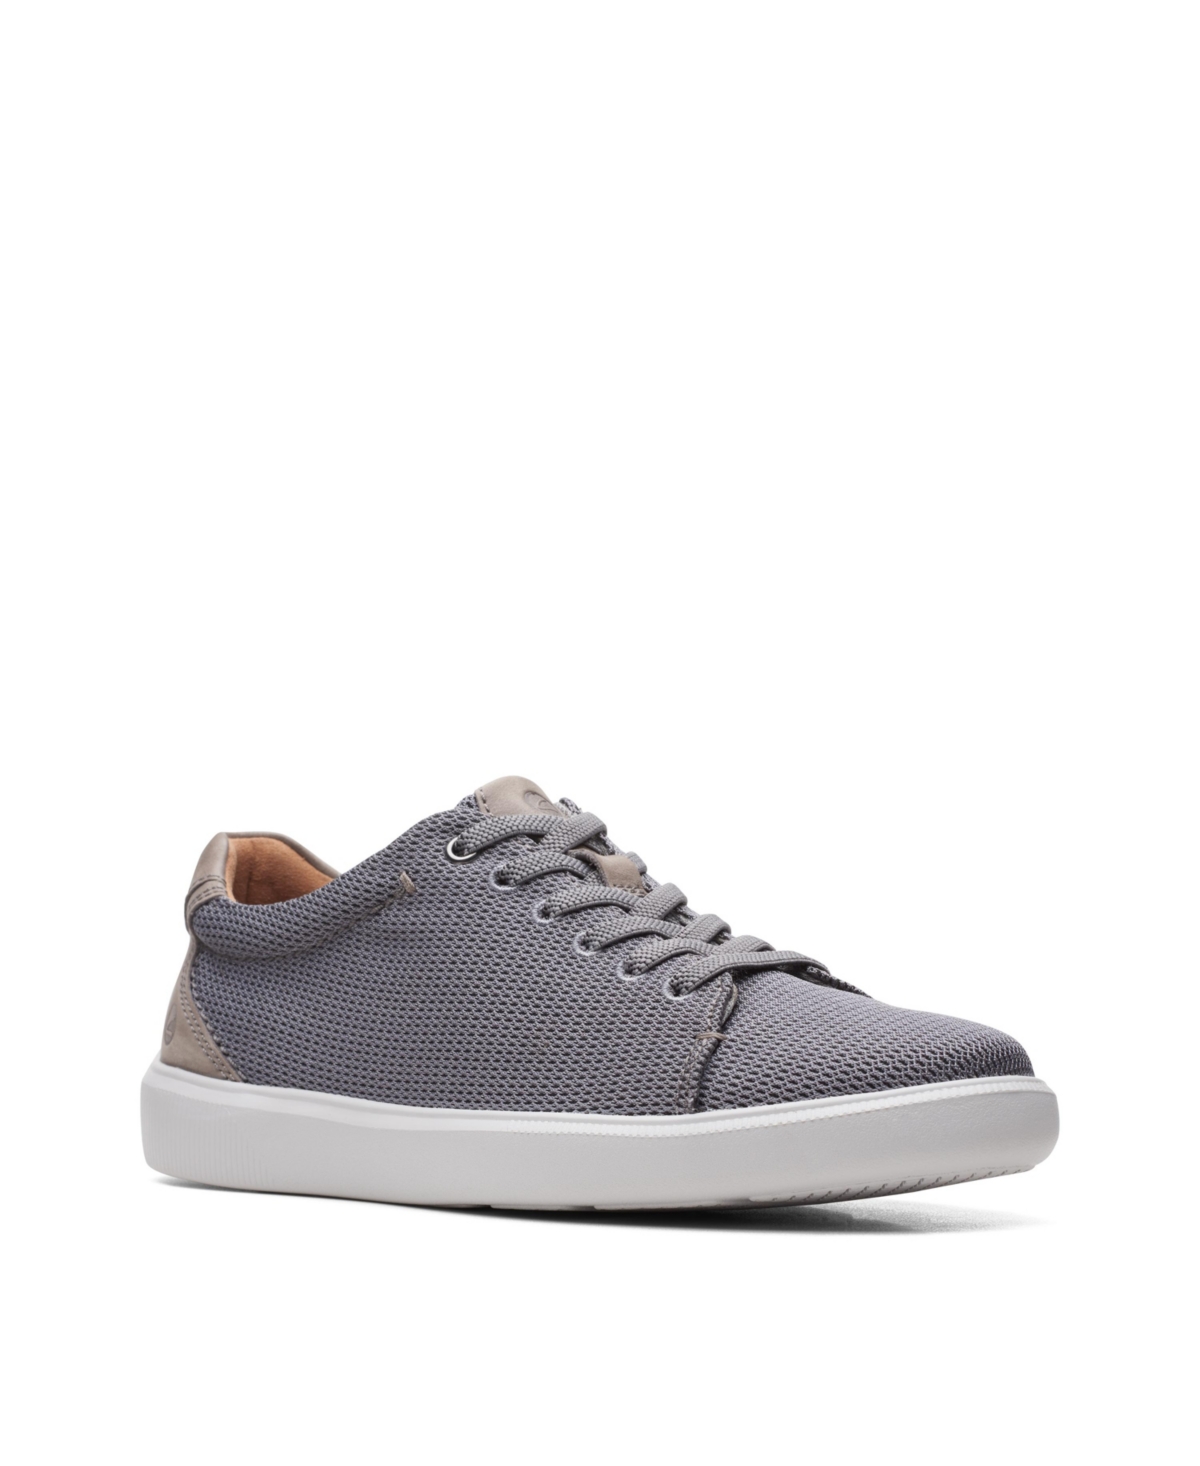 Clarks Men's Cambro Low Lace Up Sneakers Men's Shoes In Gray Textile